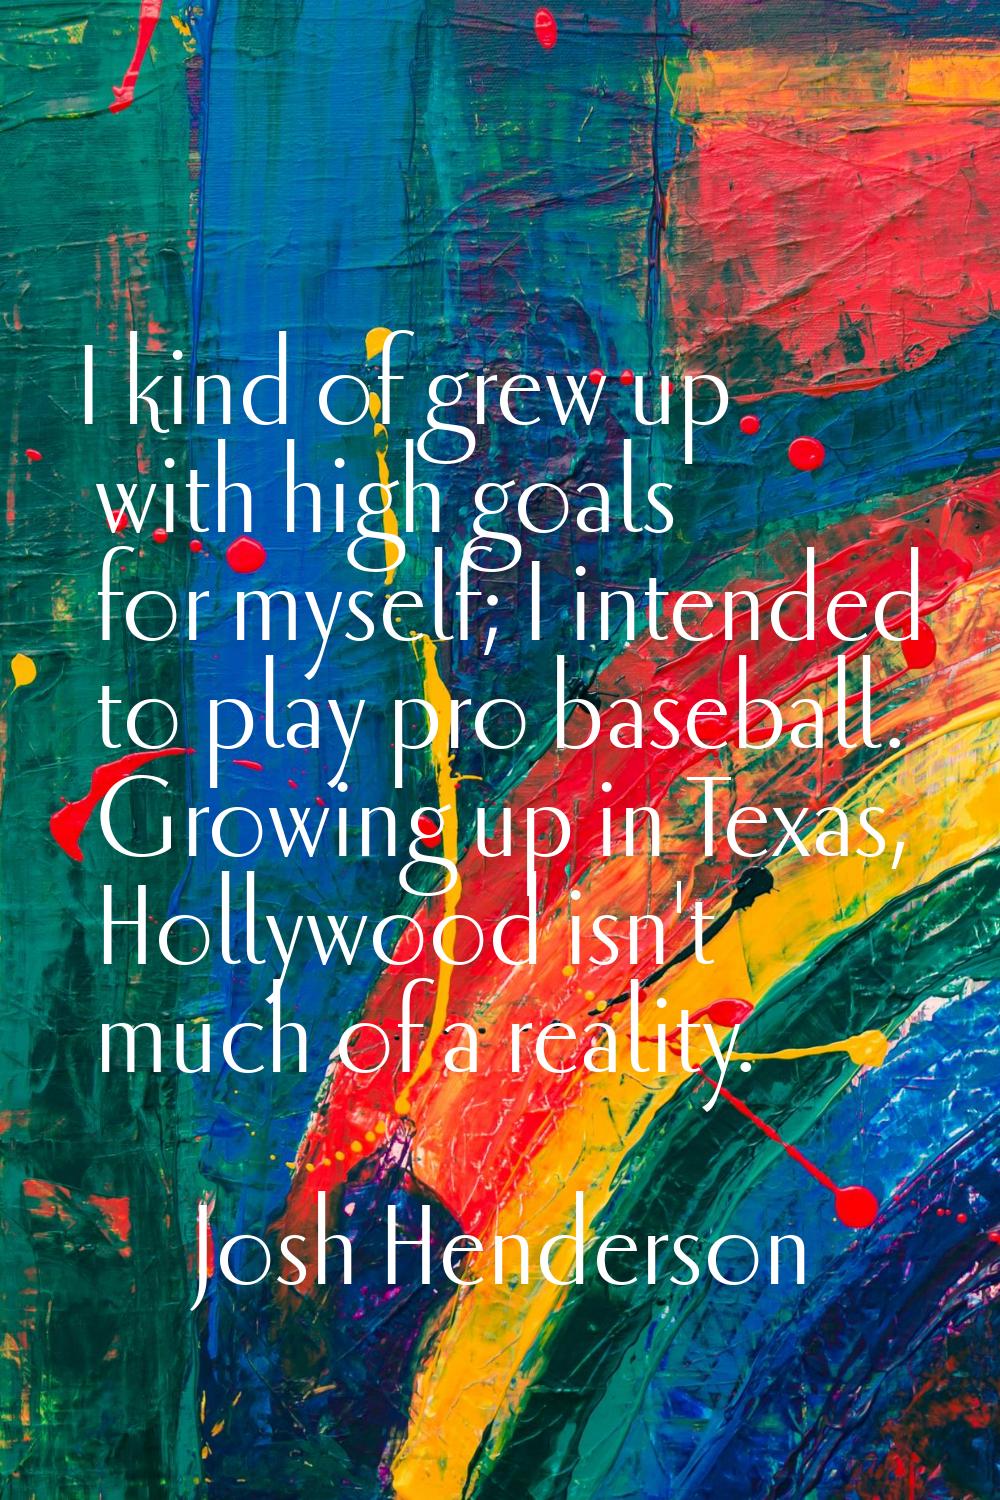 I kind of grew up with high goals for myself; I intended to play pro baseball. Growing up in Texas,